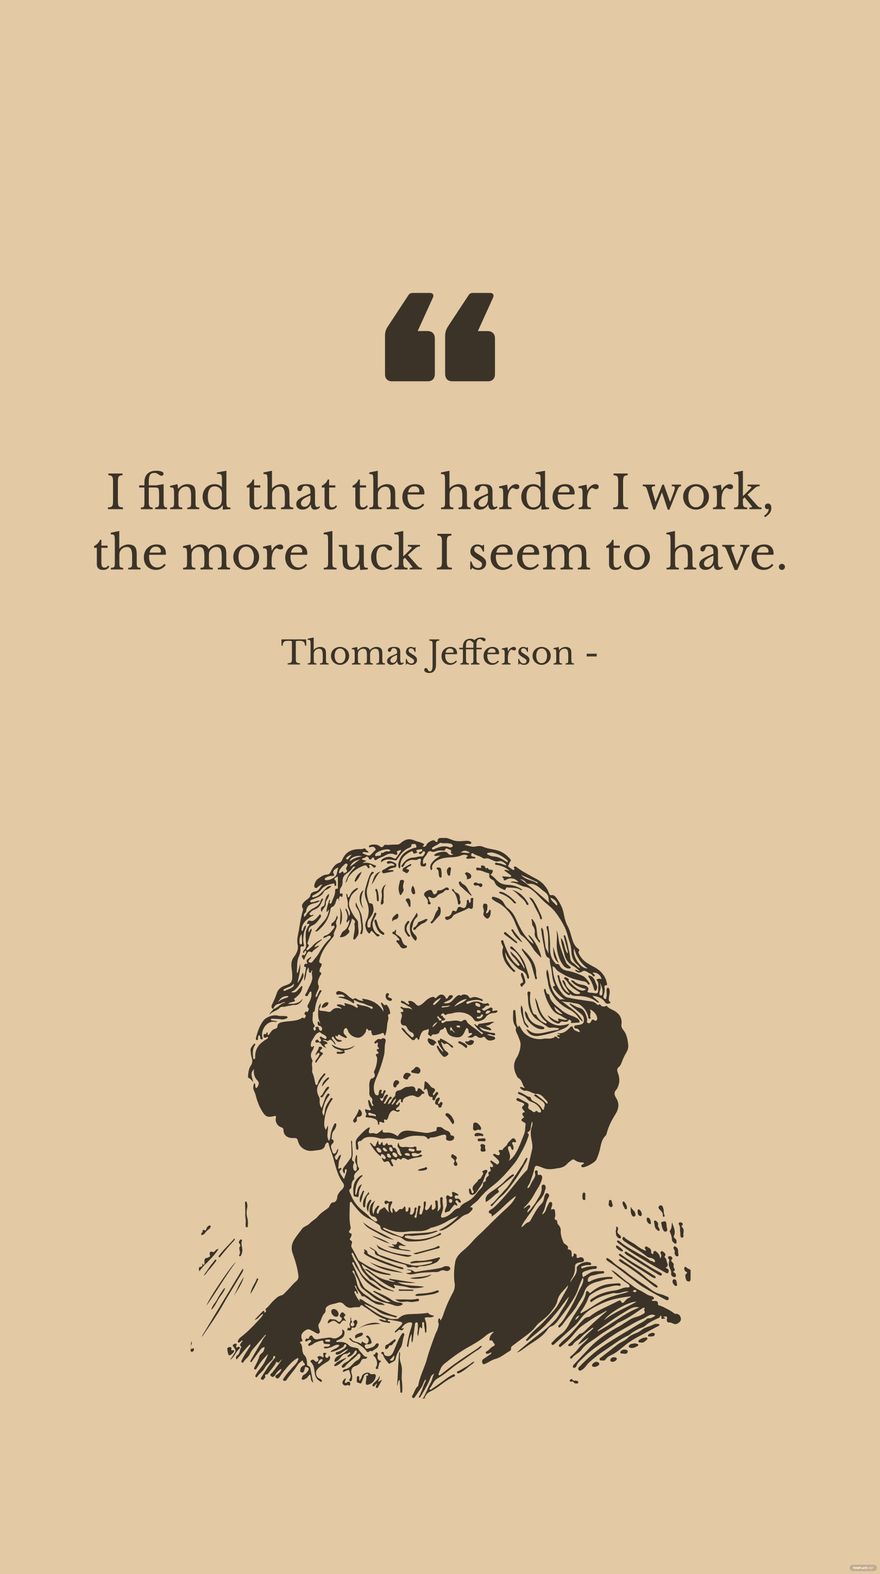 Free Thomas Jefferson - I find that the harder I work, the more luck I seem to have. in JPG